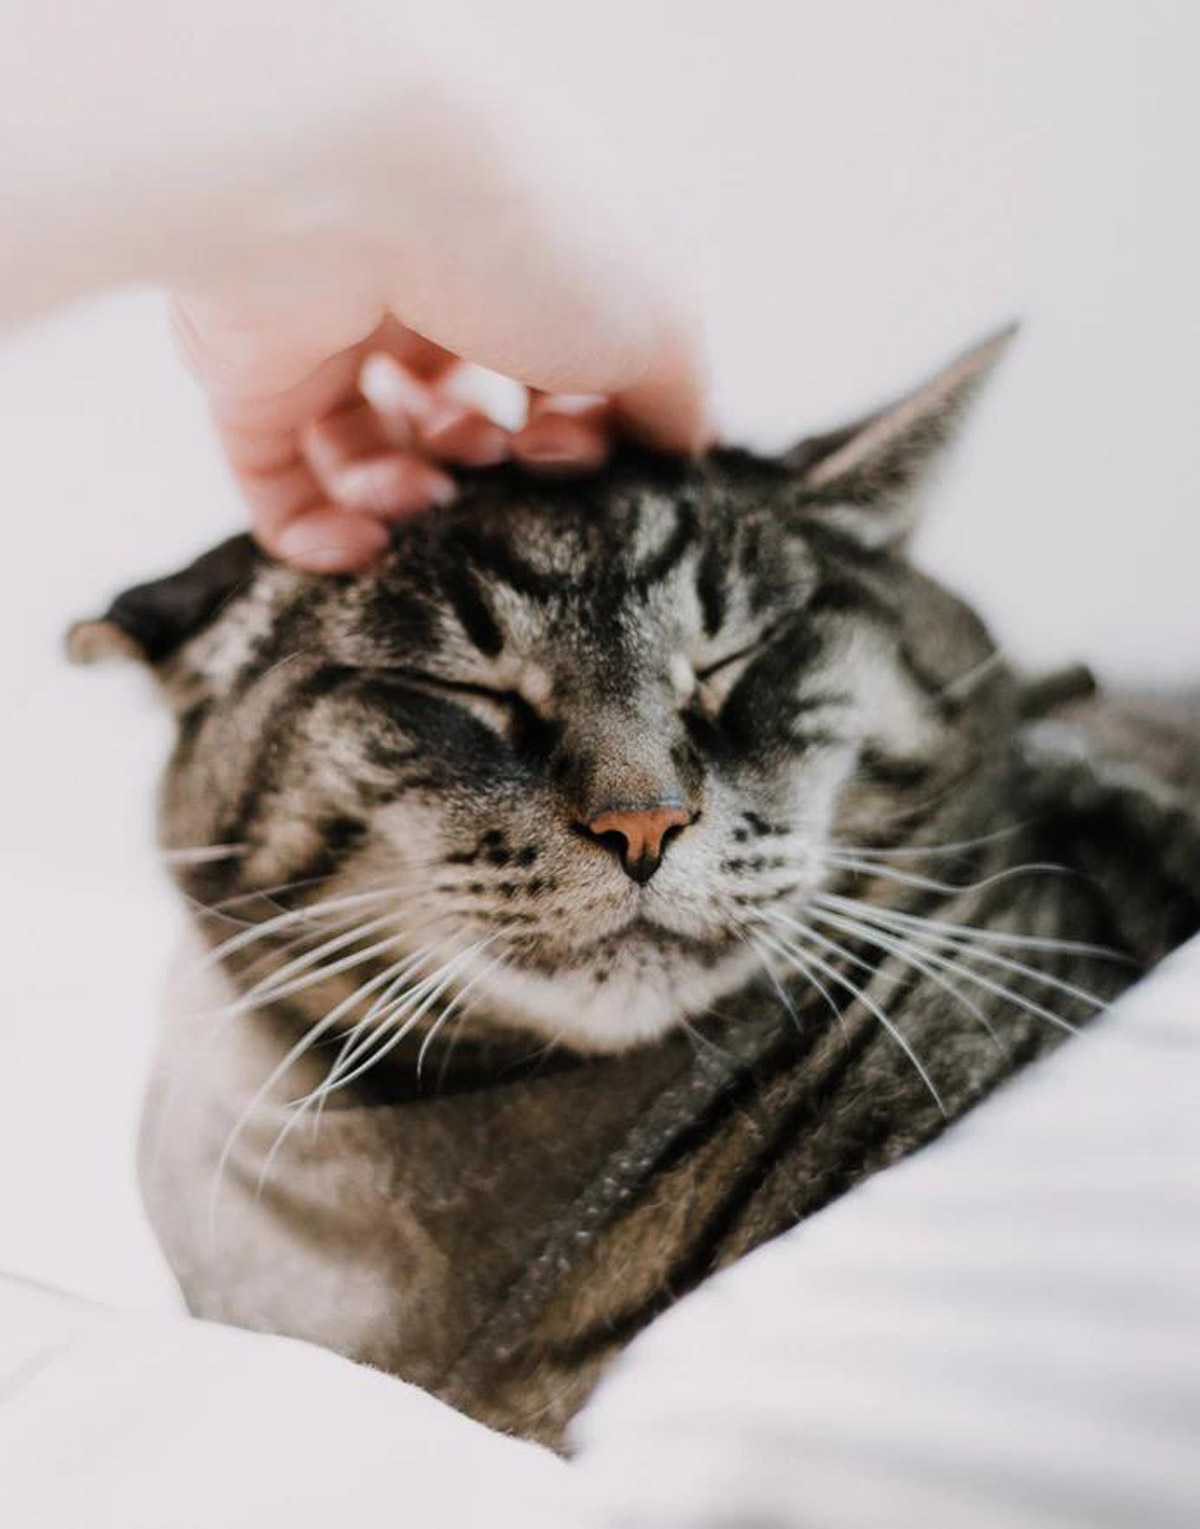 What can you do to help your cat with cancer? Read to find out more about the supportive and comfort care that you, the primary caregiver, can provide.